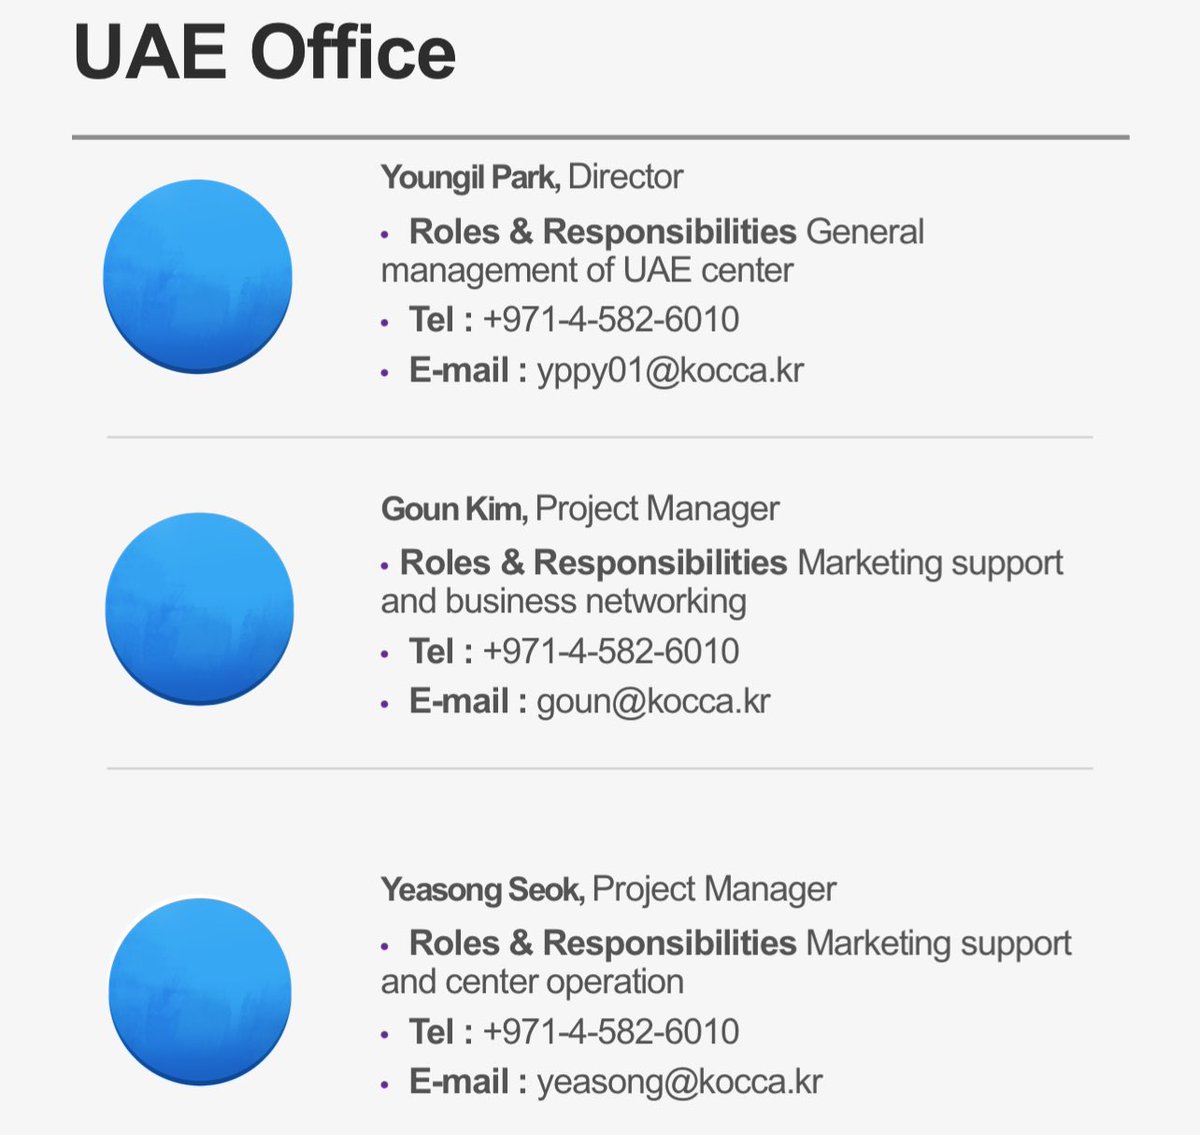 The ministry handed the investigation off to KOCCA. FOR UAE 🇦🇪 ARMYS, you may contact:

Director Youngil Park
Address 1501, Aurora Tower, Al Falak St, Dubai Media City
Tel +971-4-582-6010
Fax +971-4-582-6022

Please voice out your concerns. 🙏